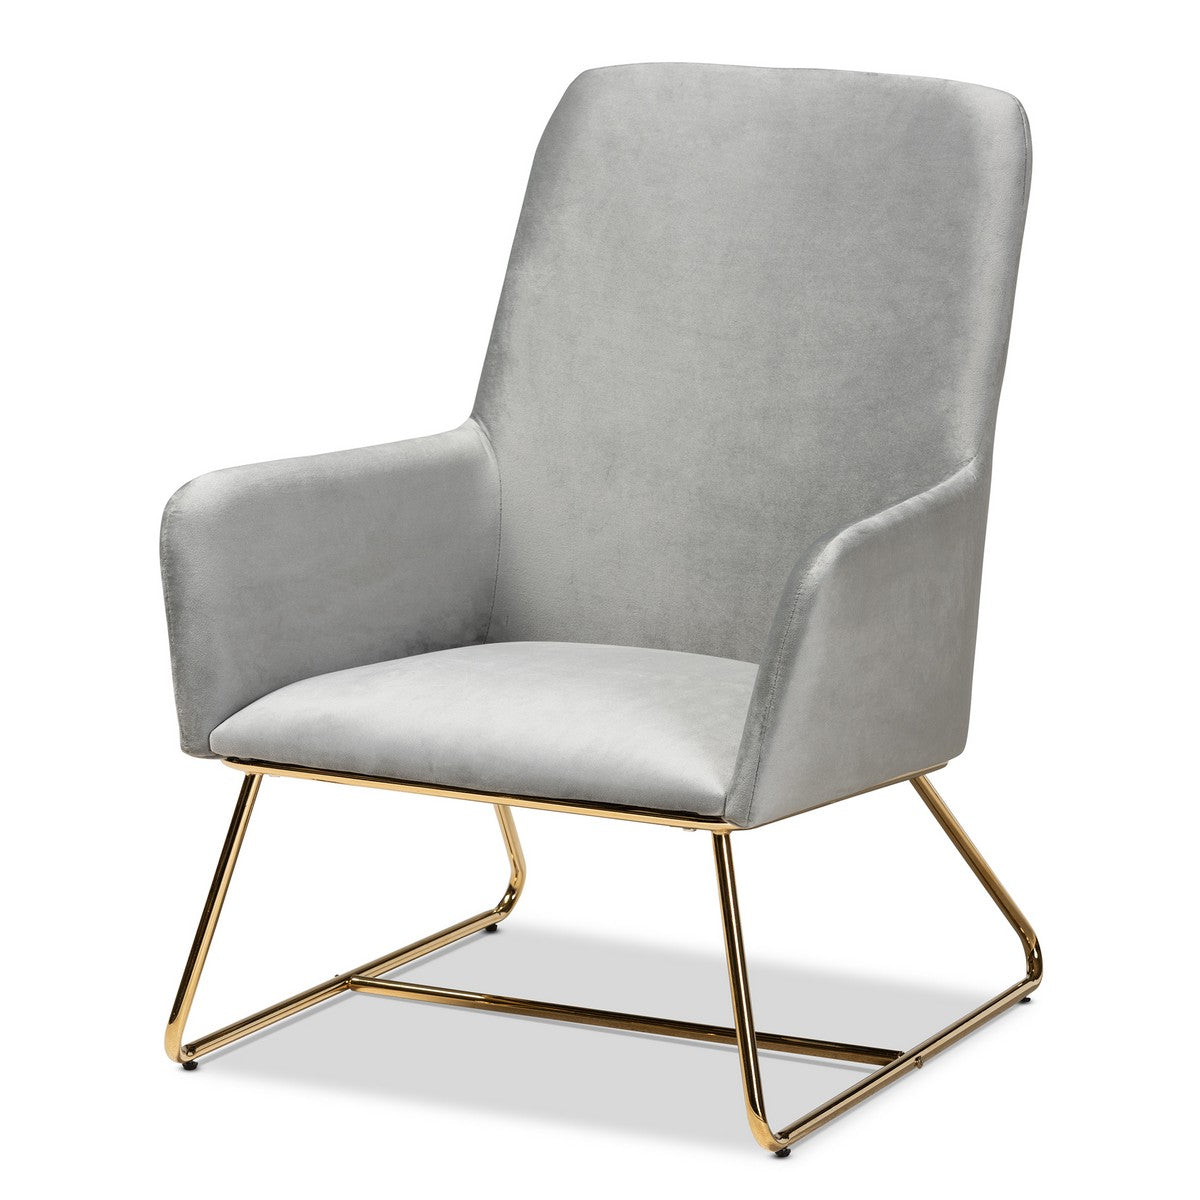 Baxton Studio Sennet Glam and Luxe Grey Velvet Fabric Upholstered Gold Finished Armchair Baxton Studio- Chairs-Minimal And Modern - 1